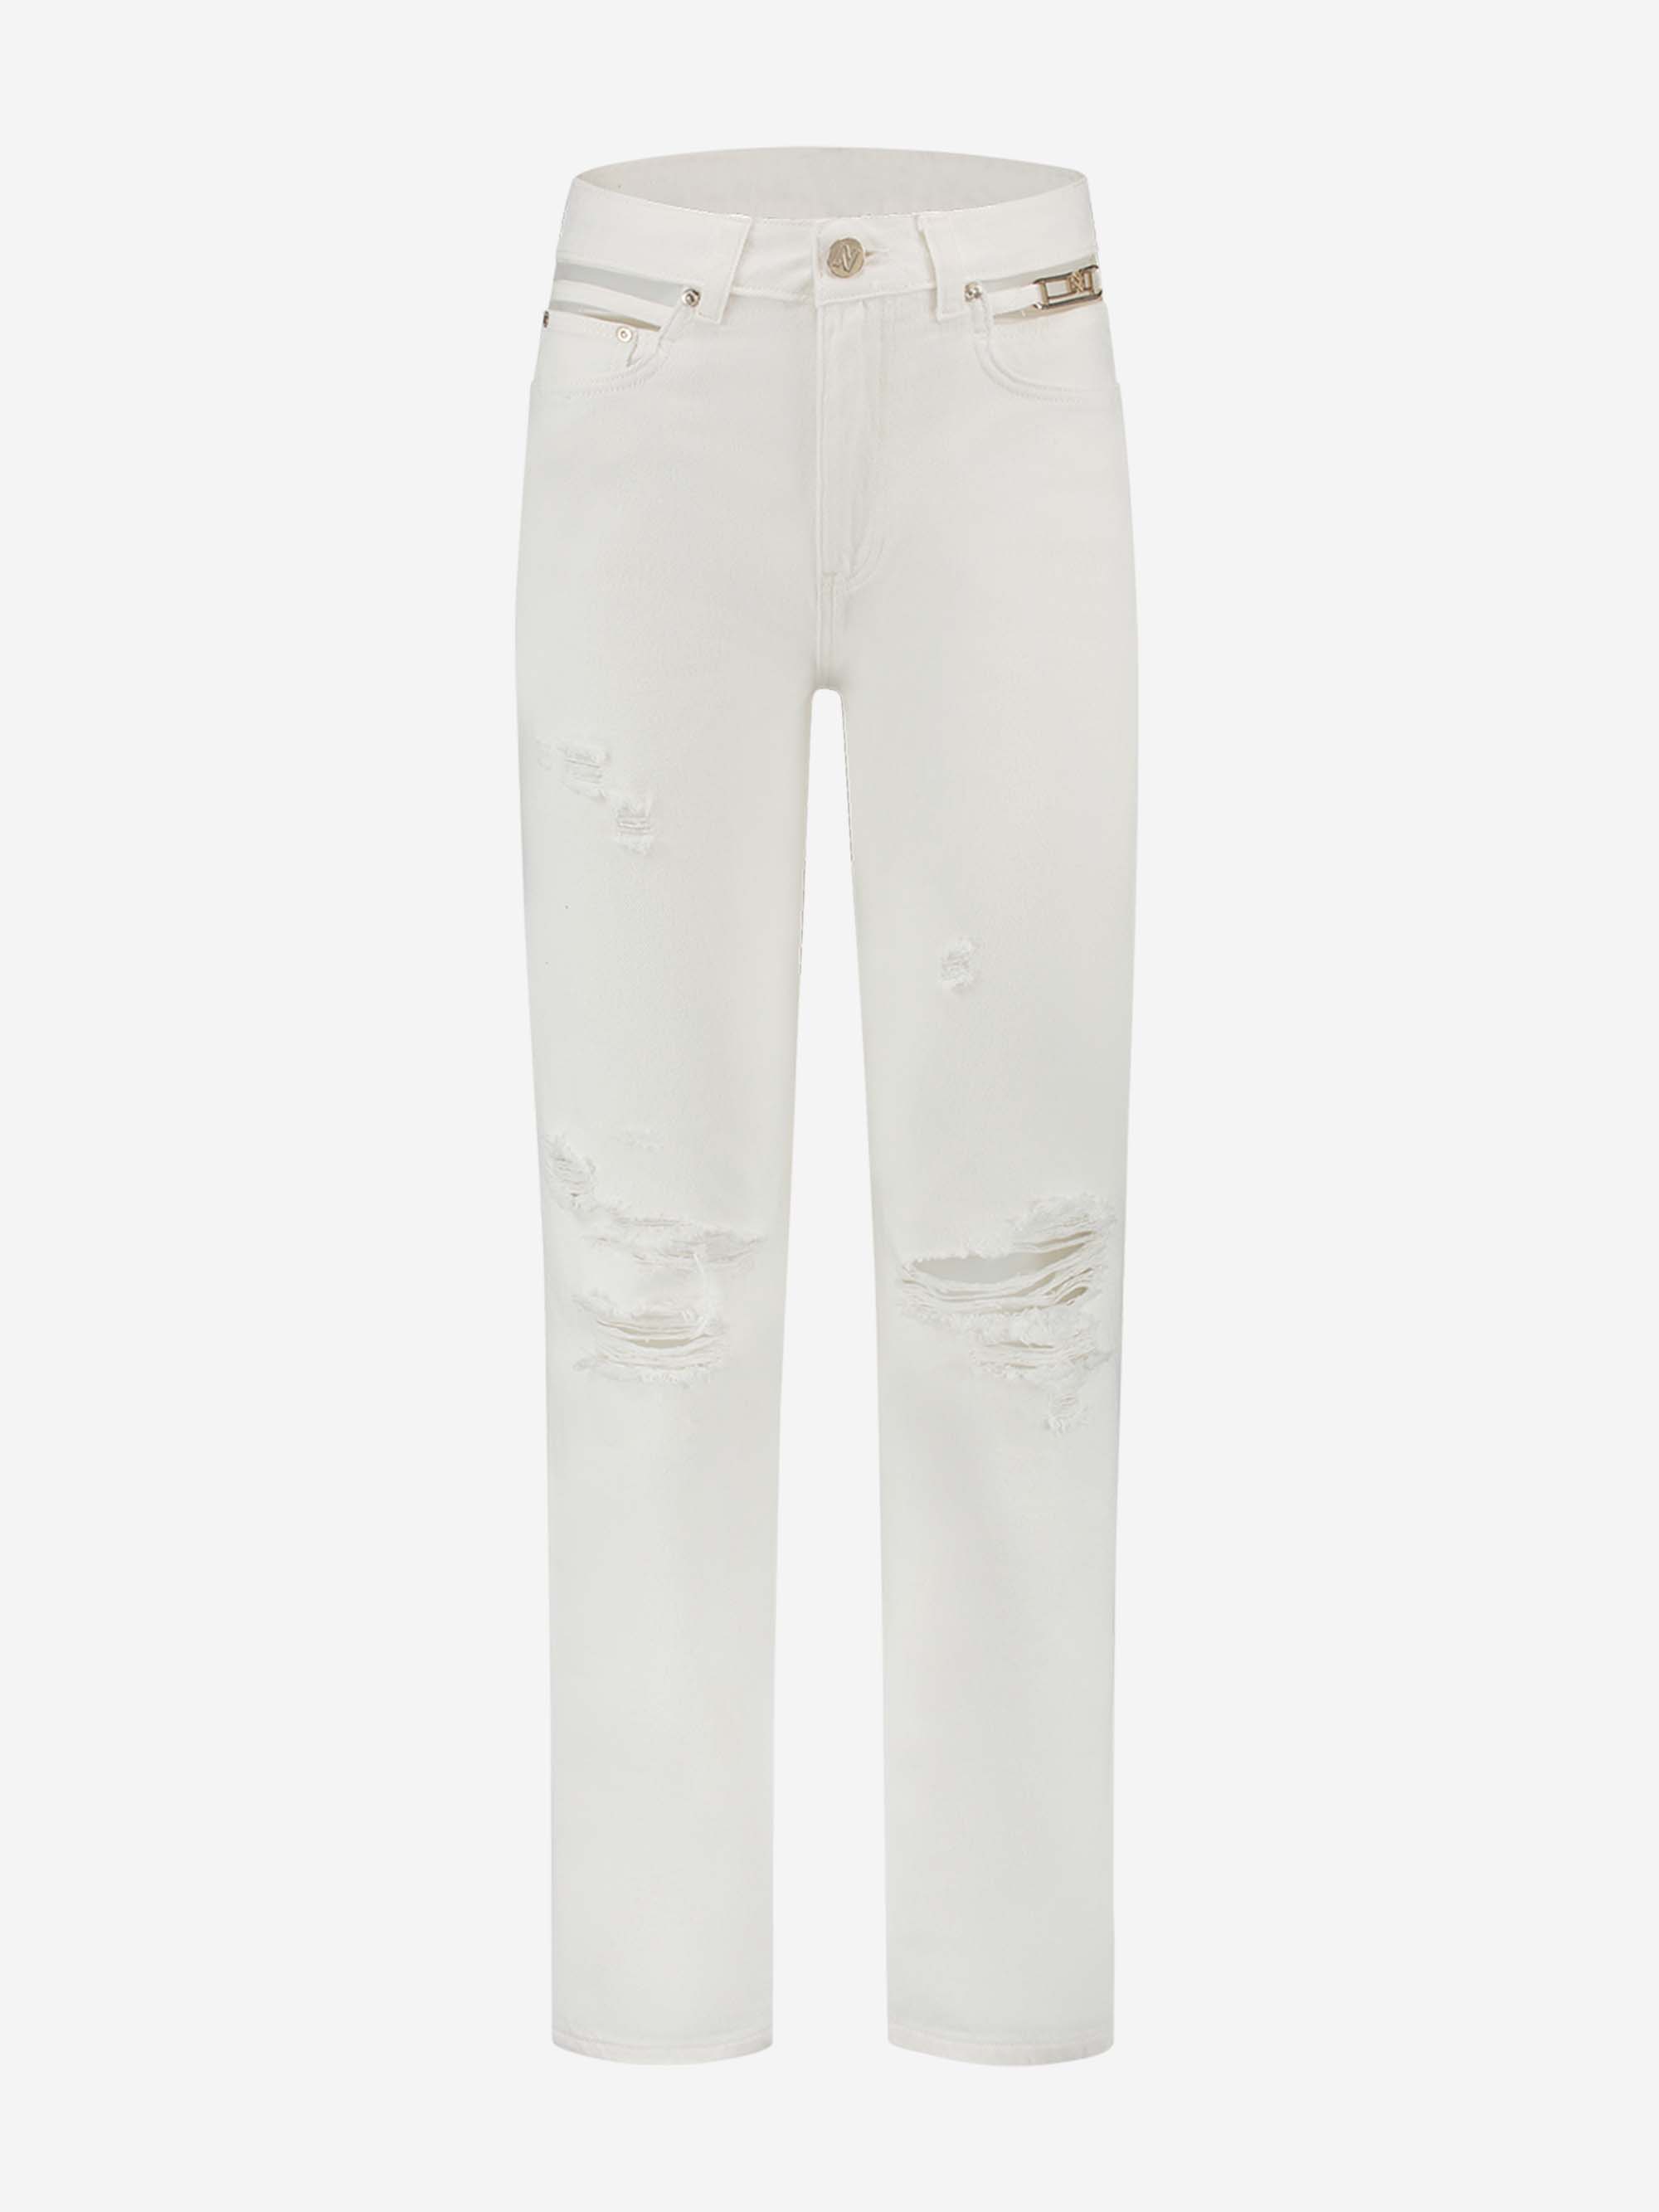 Cassidy White Jeans